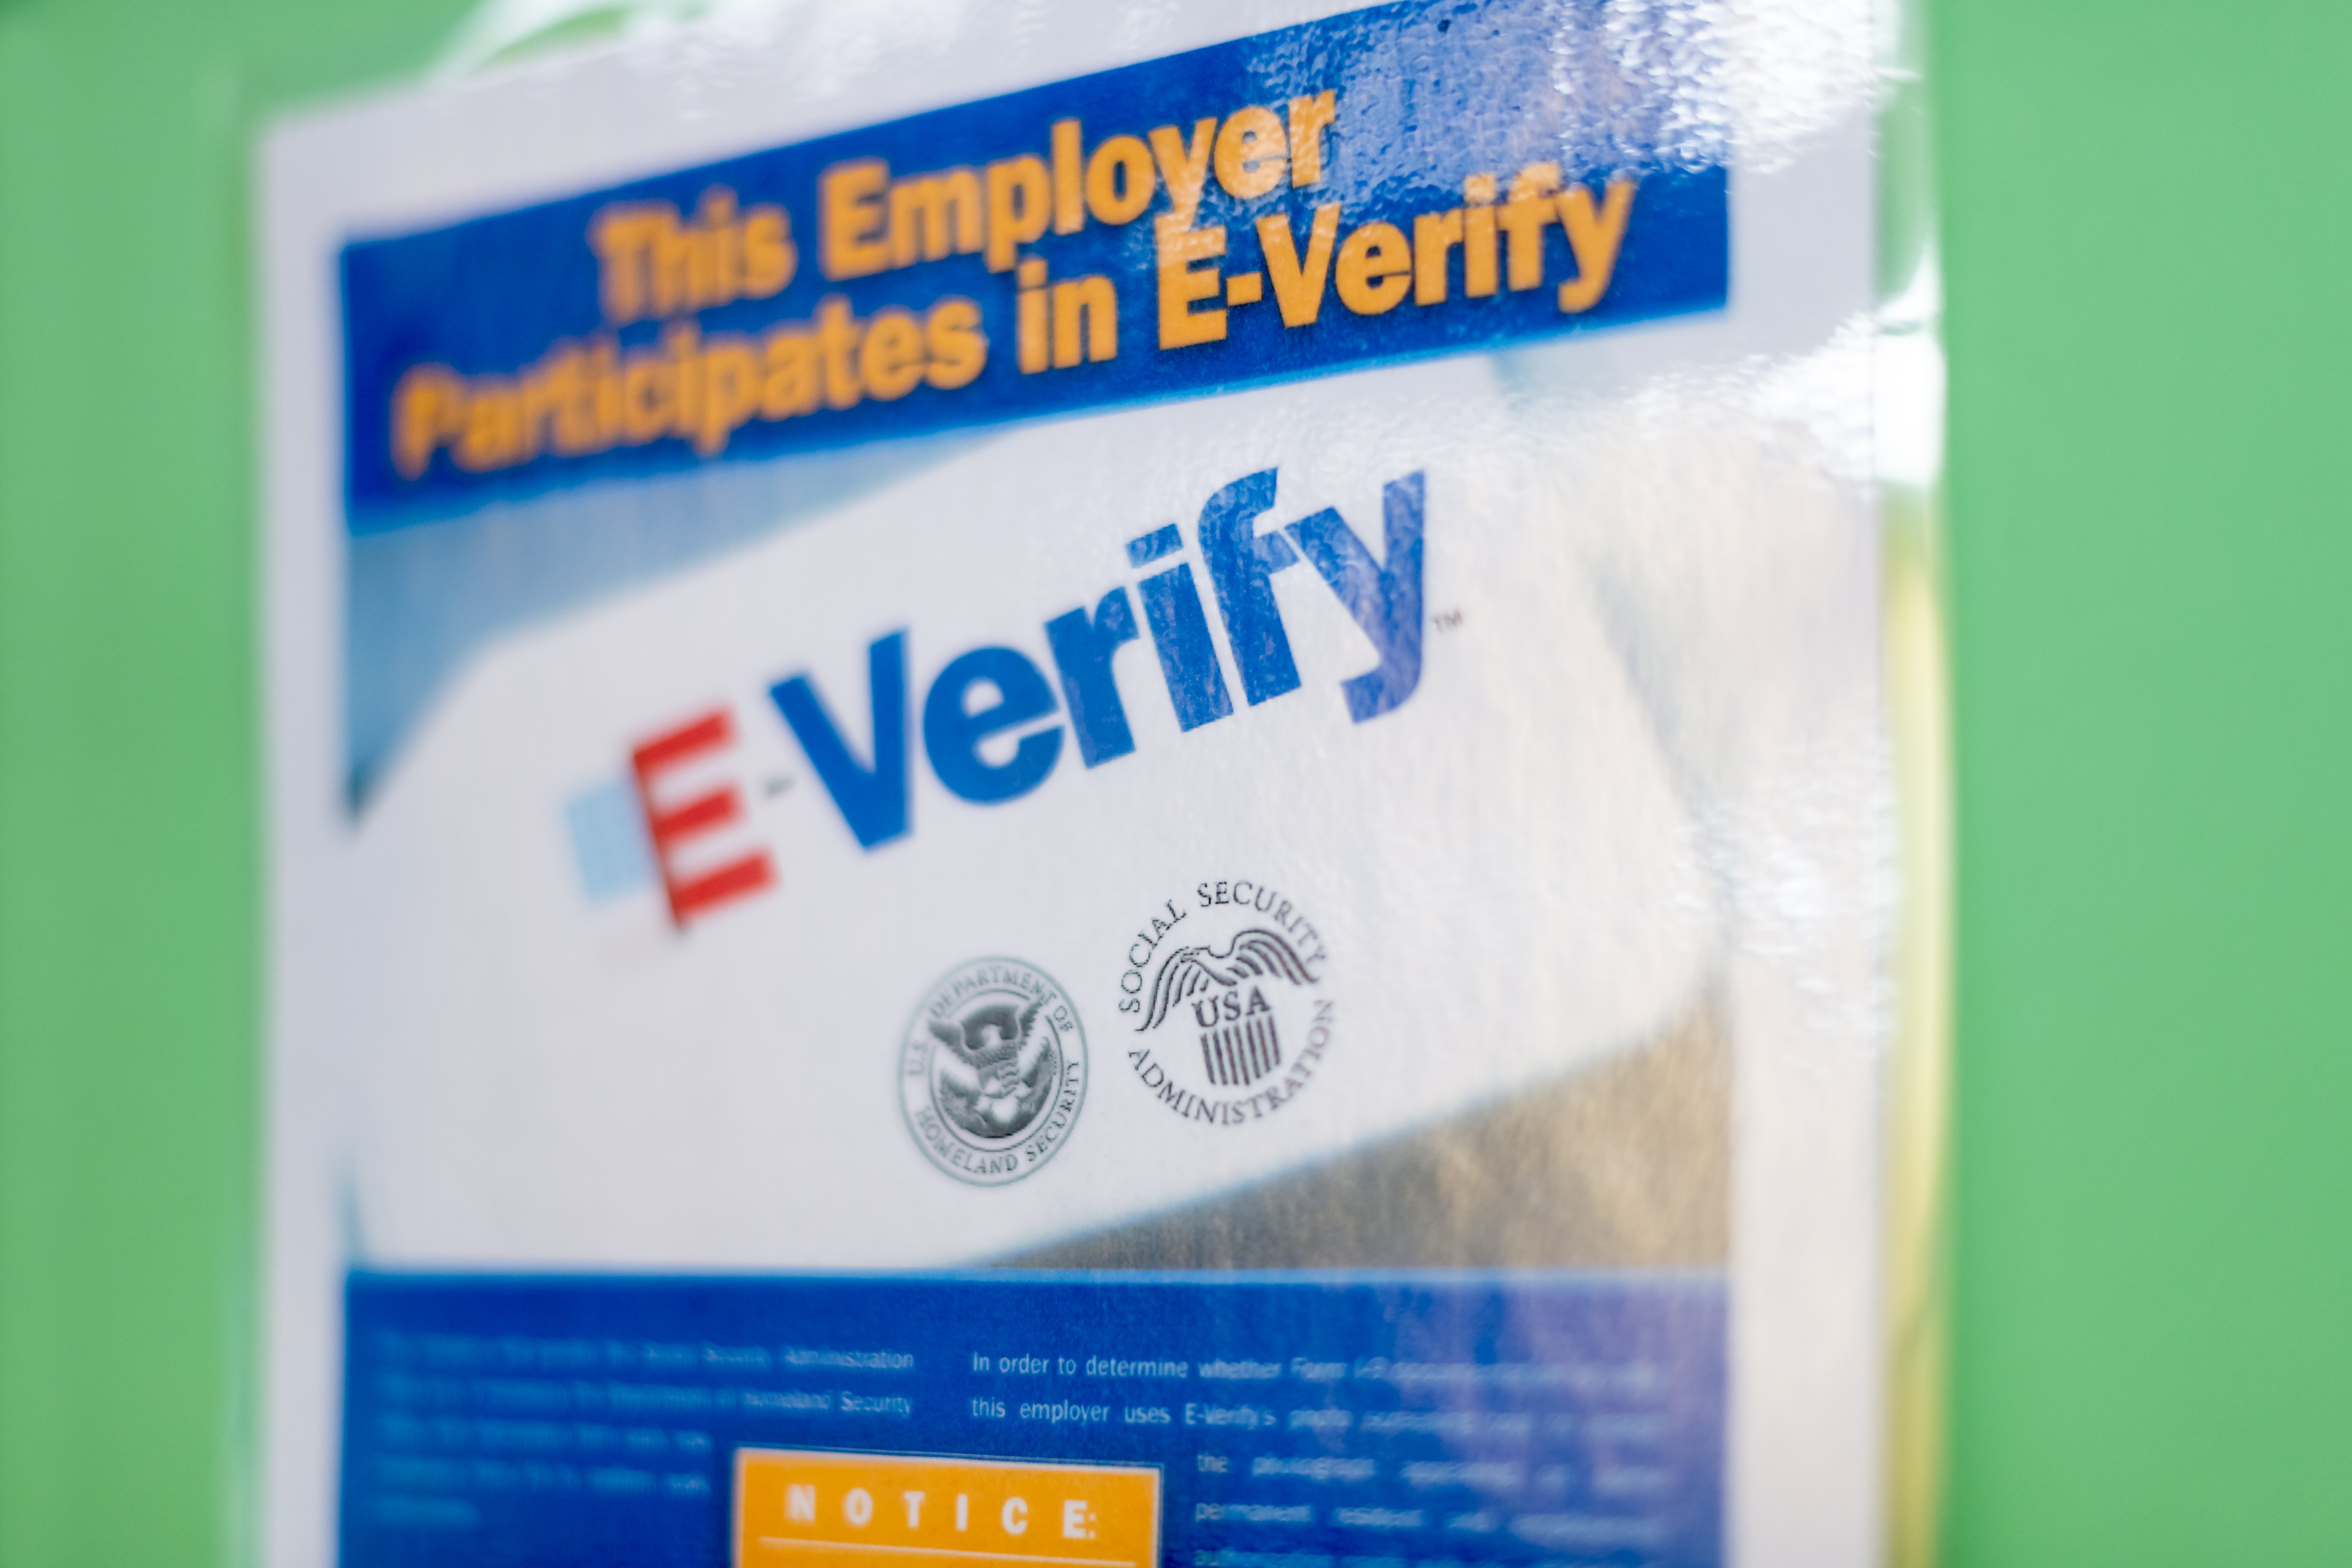 Do You Have to E-Verify All Employees?